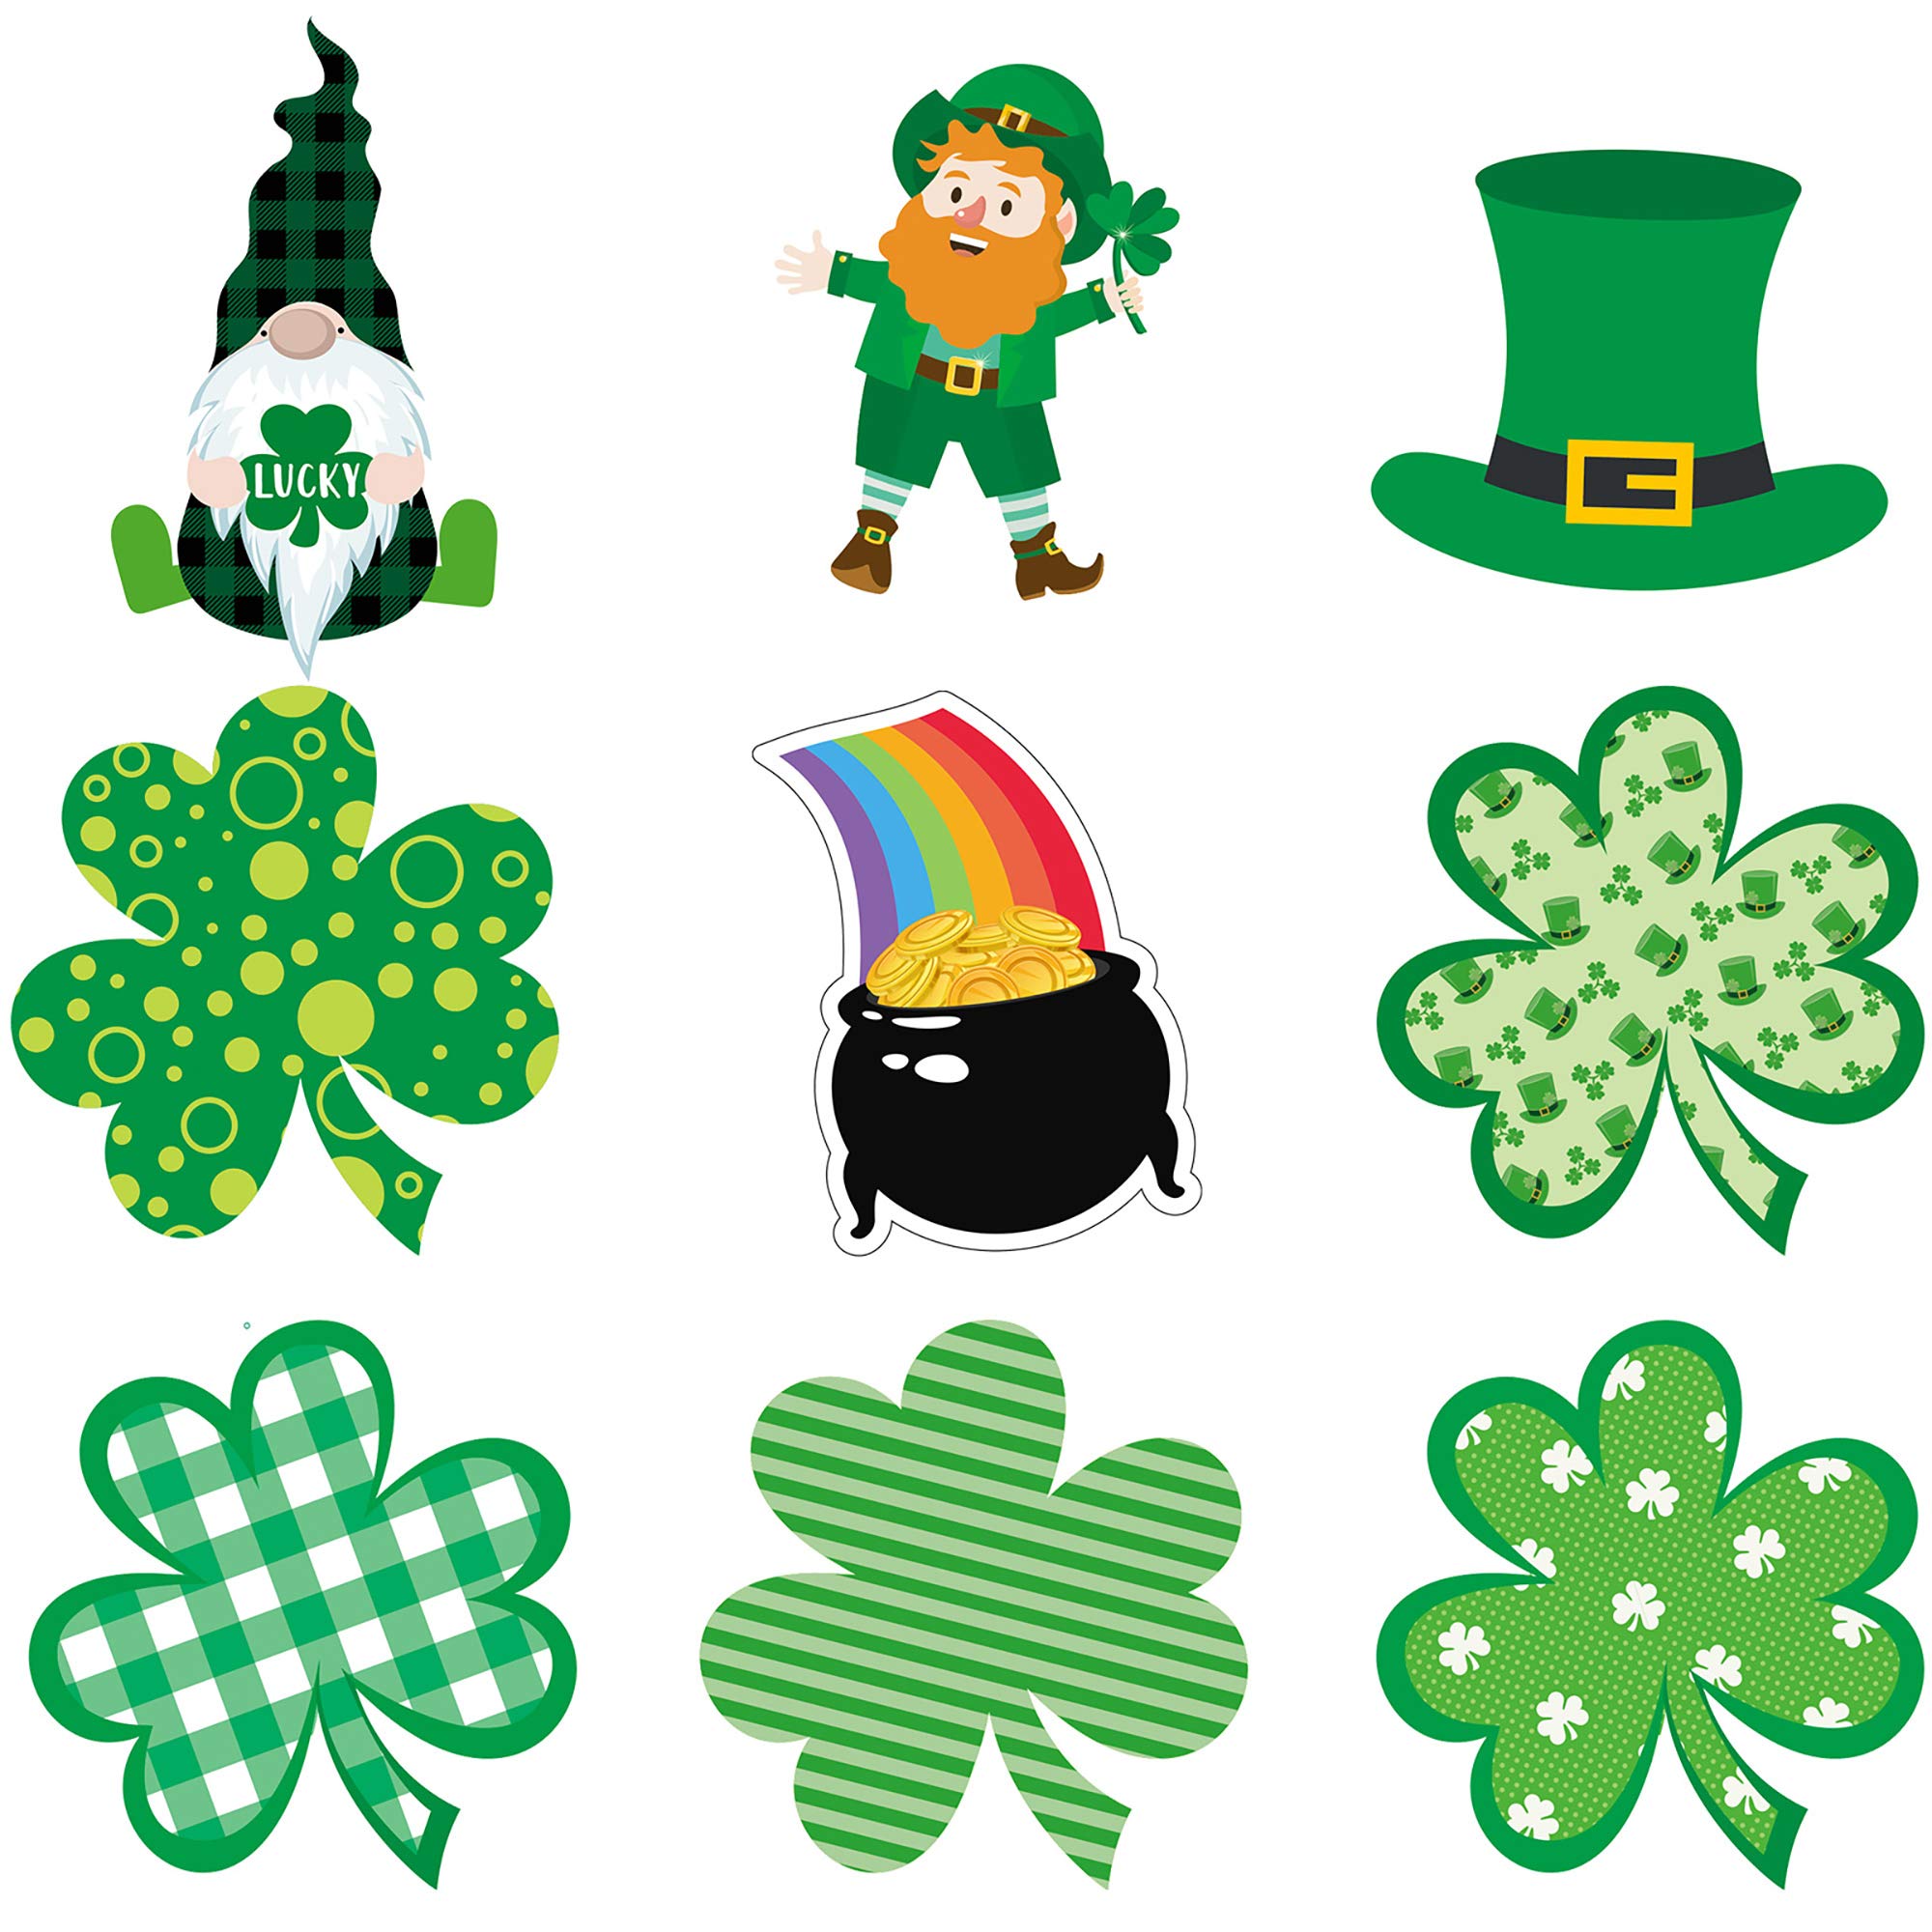 Pieces St. Patrick's Day Cut Outs Irish Paper Cut Outs With 80 Glue Point Dots Gnome Leprechaun Shamrock Cut Outs For St. Patrick's Day Party Home Classroom Bulletin Board Decorations, 10 Designs